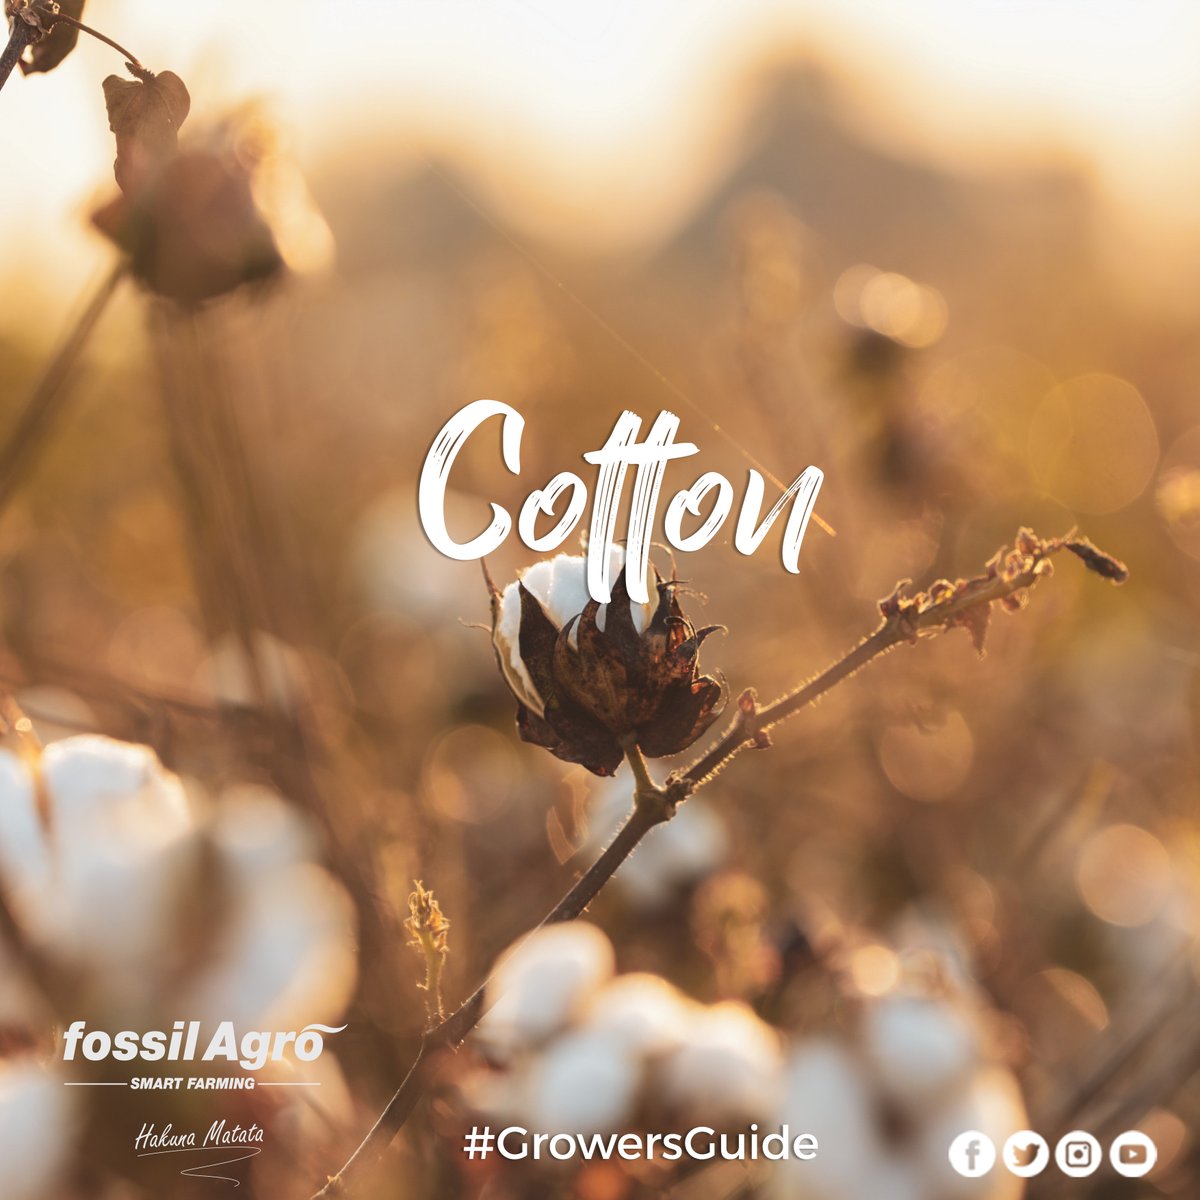 Cotton, a semi-xerophyte, is grown in tropical & sub-tropical conditions. 
A minimum temperature of 15oC is required for better germination under field conditions. 
The optimum temperature for vegetative growth is 21-27oC 
#fossil #hakunamatata https://t.co/bVvdmQ7Spc